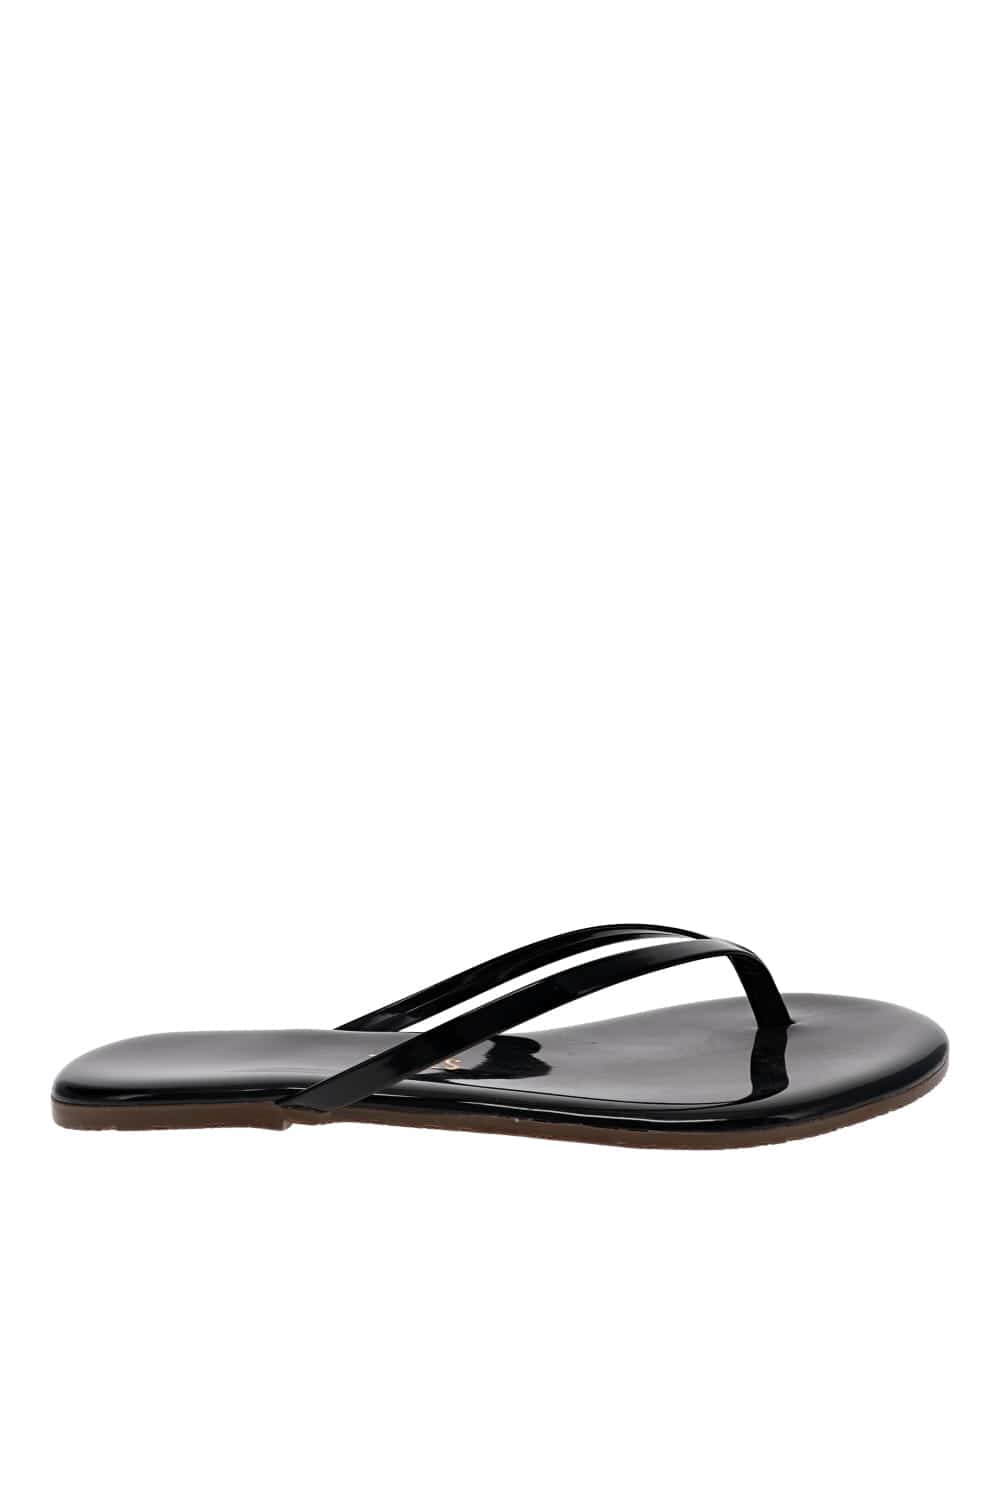 TKEES Glosses Licorice Leather Sandal